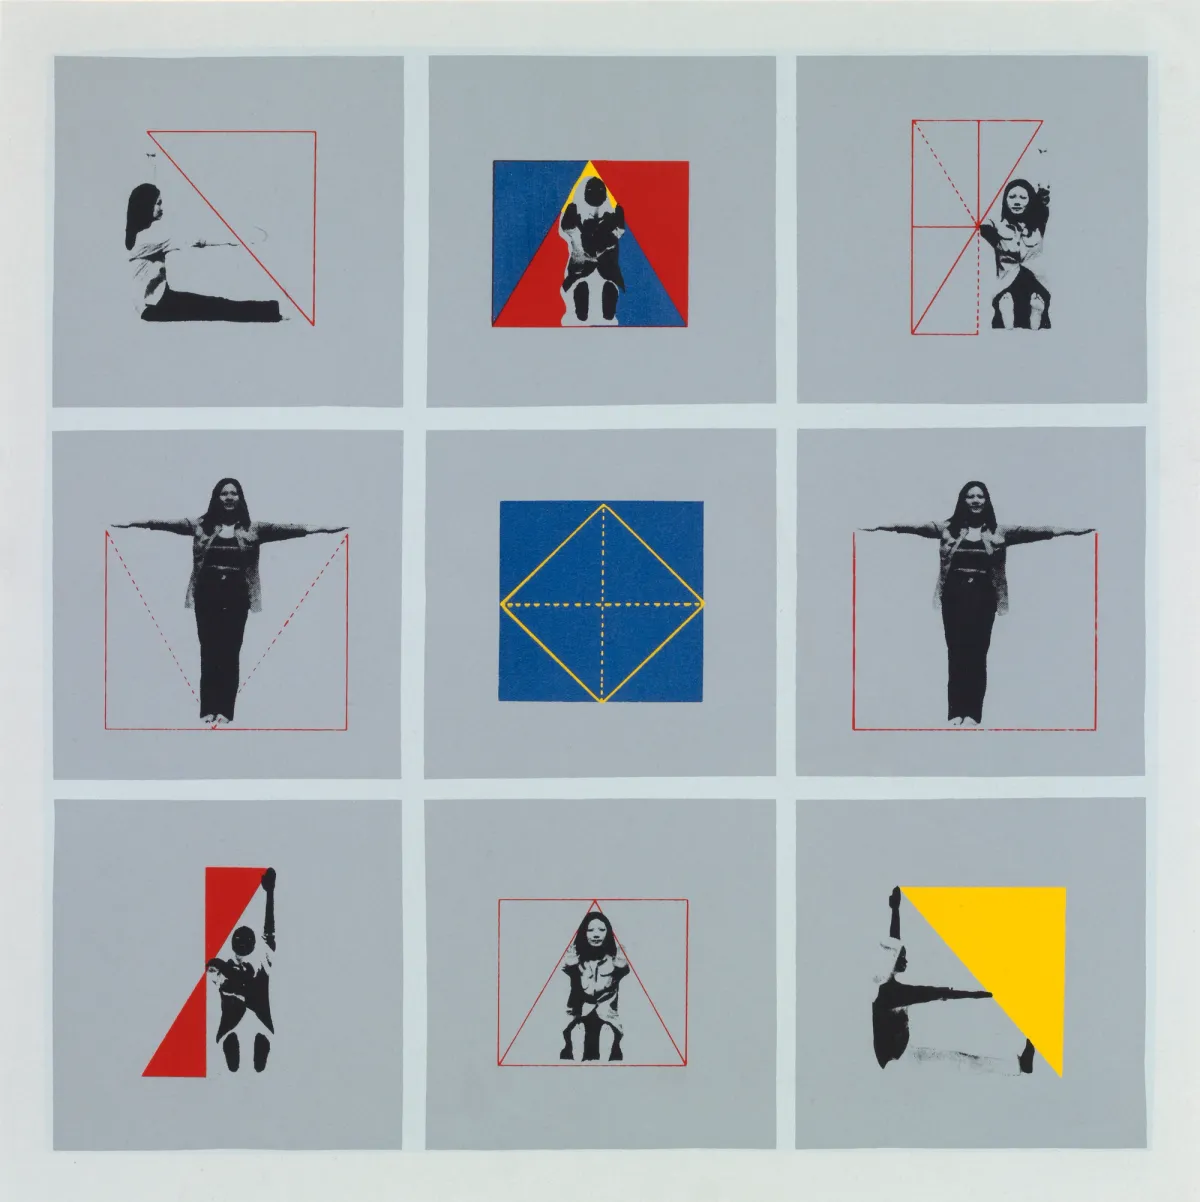 A grid of nine square images displaying a person in various poses rendered in black and white or in negative effect, and geometric shapes in red, yellow, or blue, with certain images featuring dashed lines. The central image showcases a diamond shape enclosed in a yellow-bordered blue square.